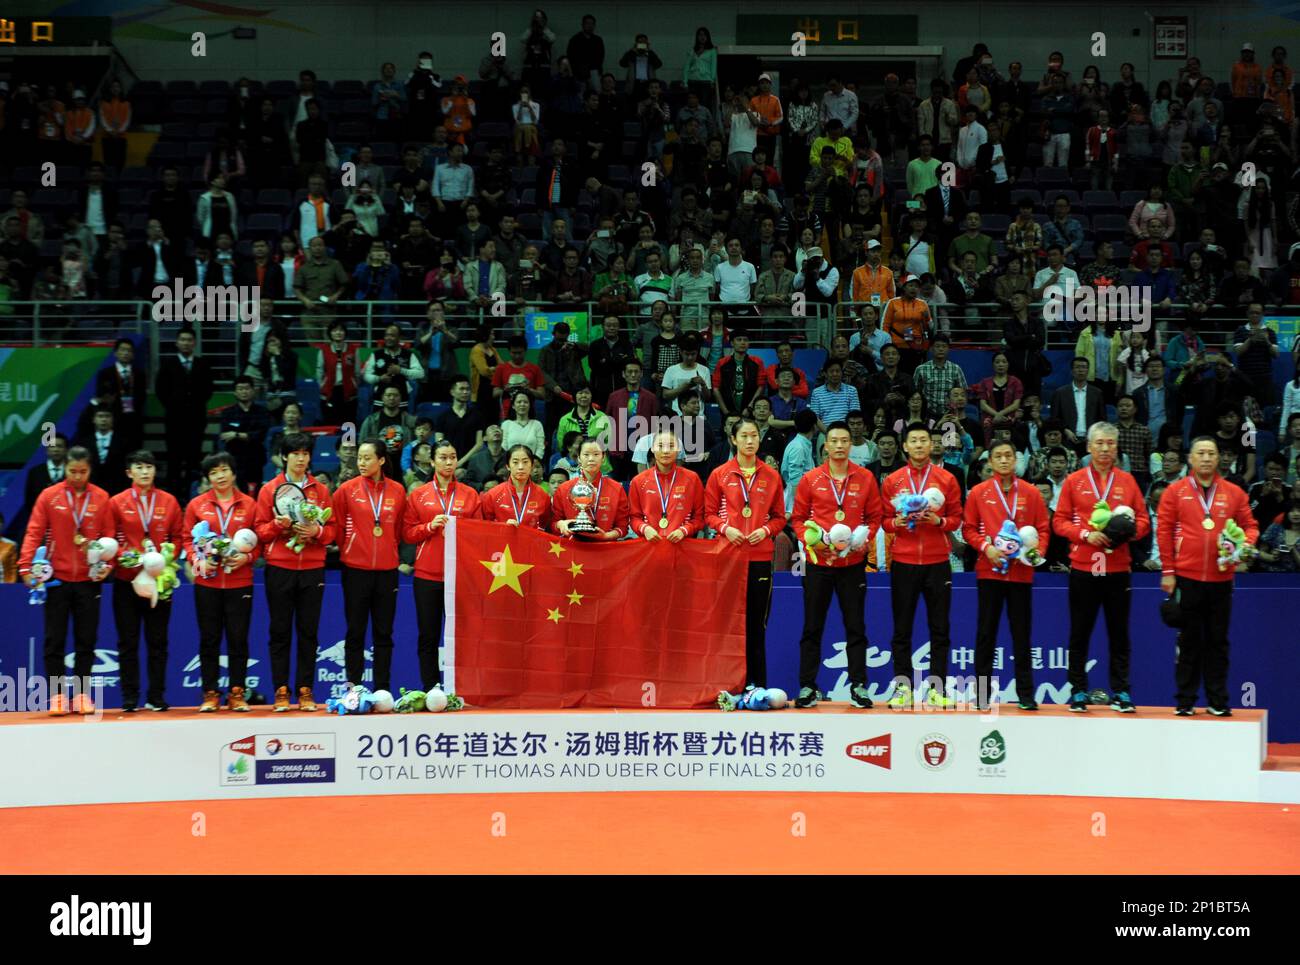 Badminton players and team members of China pose during the award ceremony after defeating South Korea to win the BWF Uber Cup 2016 in Kunshan city, e Stock Photo